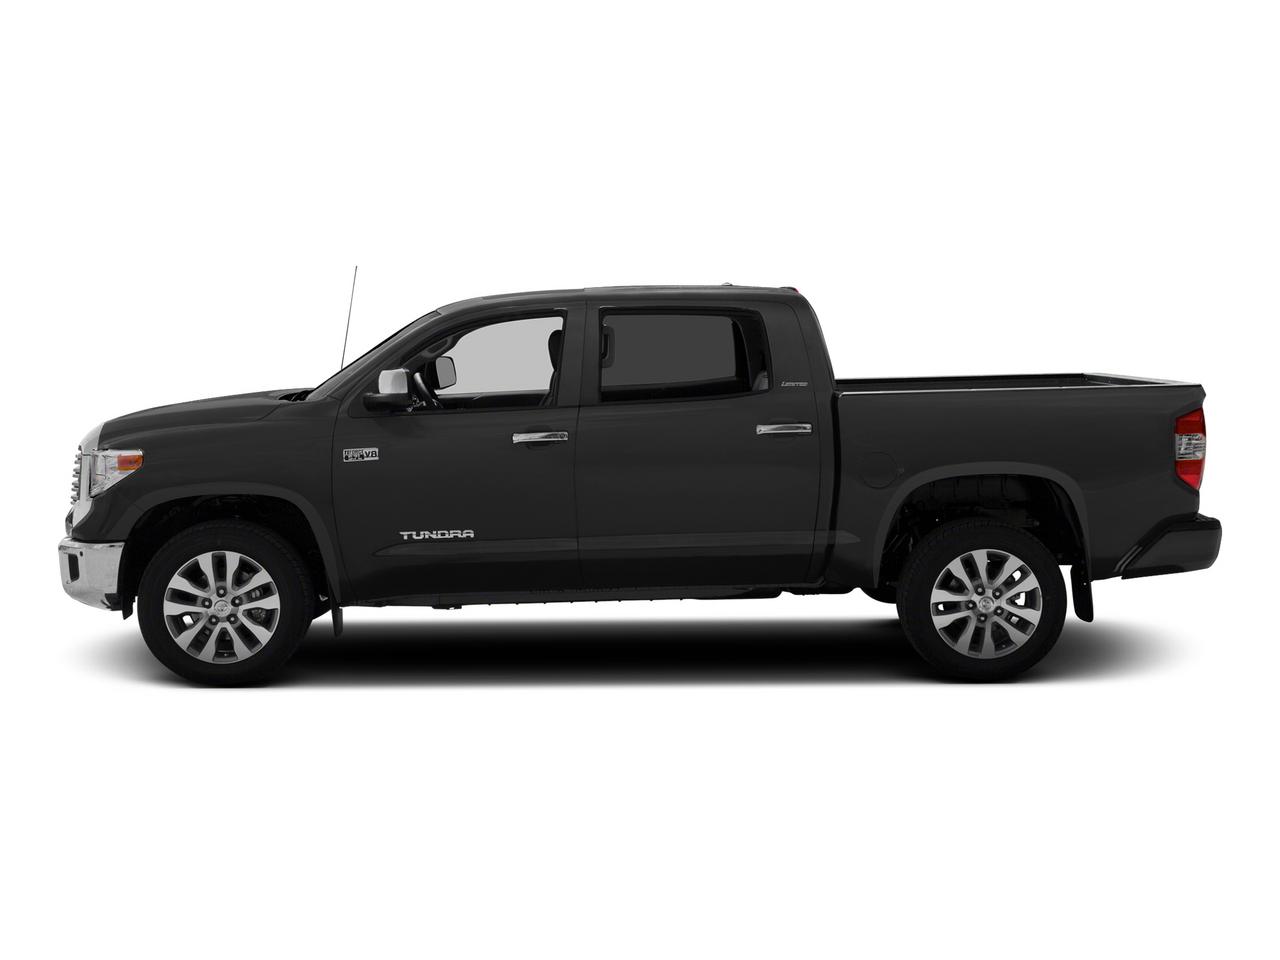 Used 2015 Toyota Tundra TRD Pro with VIN 5TFDW5F12FX419254 for sale in Pine River, Minnesota